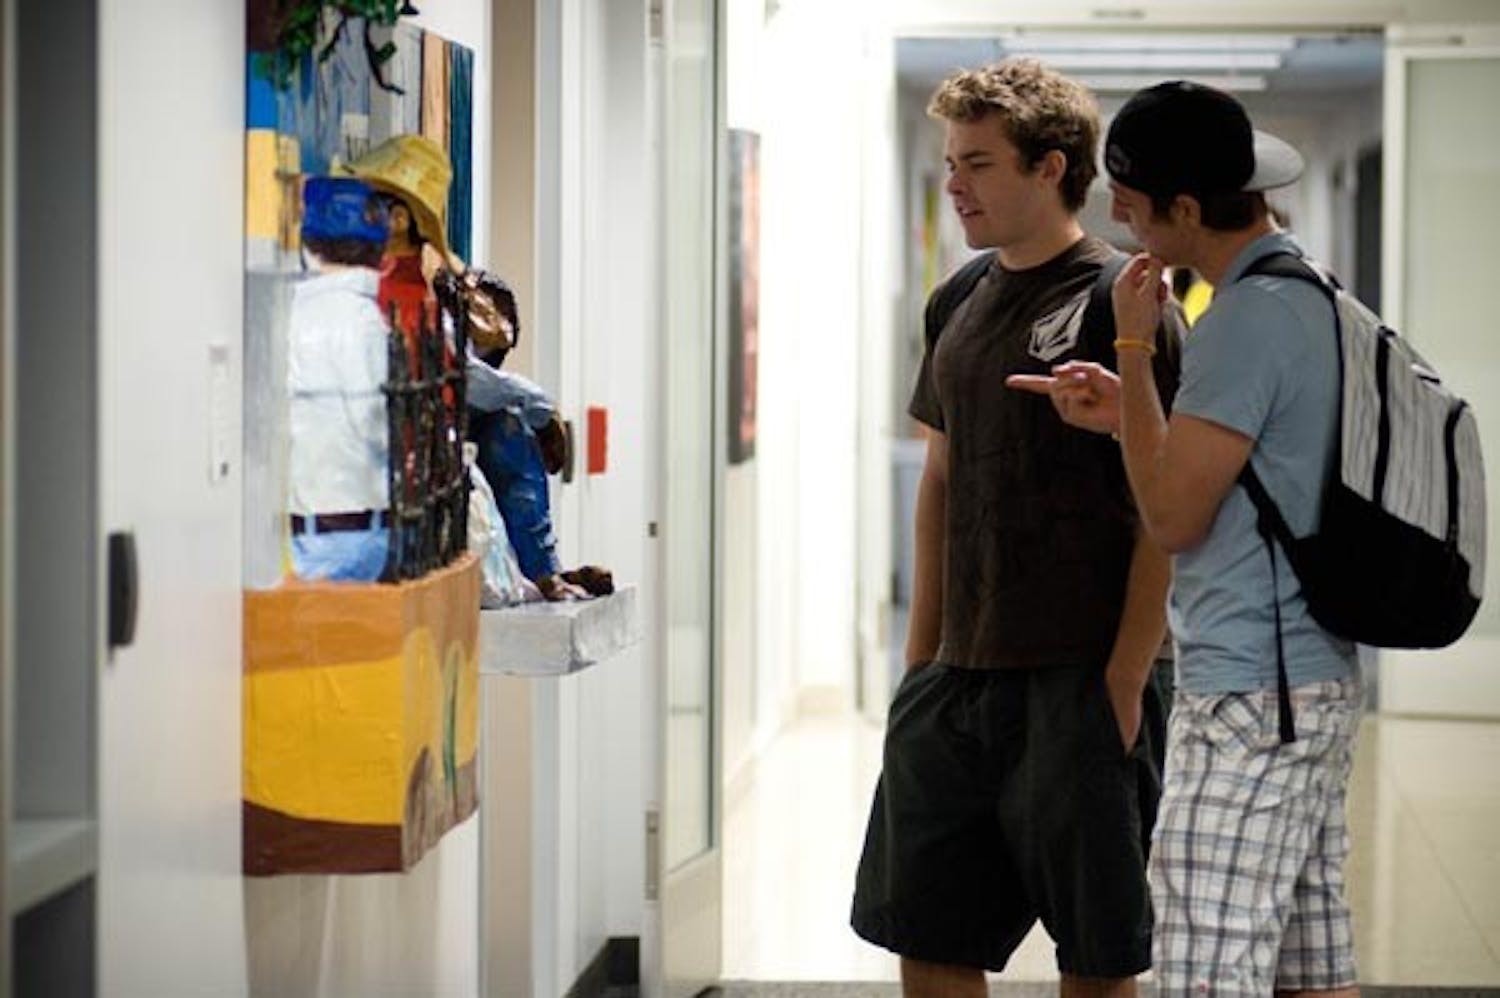 ART ENTHUSISTS: Print Journalism junior Blake Higgins and Broadcast sophomore Collin Flemming check out some of the 3-D art at the University Center building on the Downtown campus. (Photo by Aaron Lavinsky)